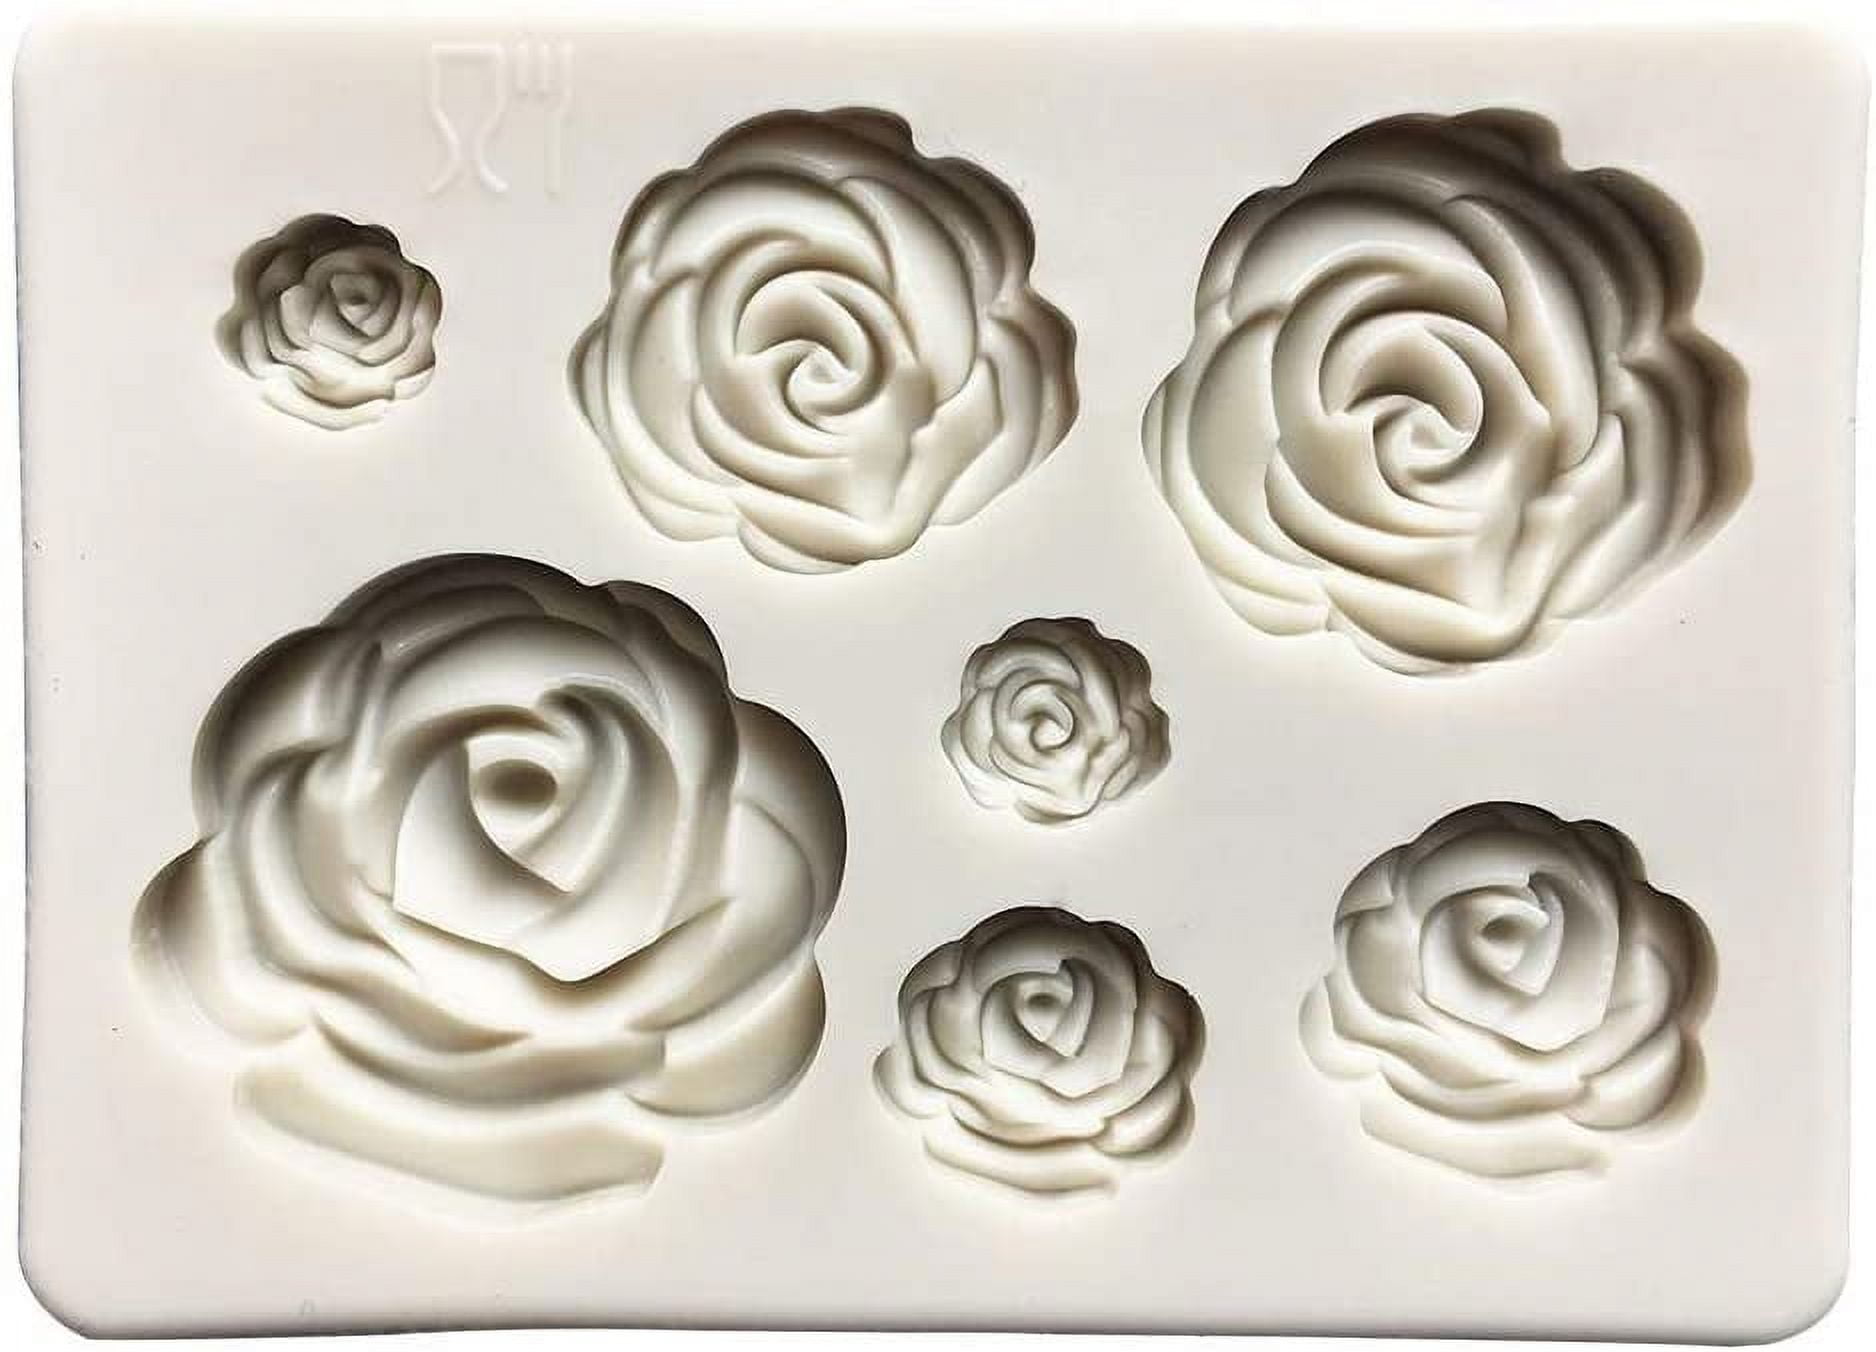 Lotus Flower Silicone Fondant Cake Molds Chocolate Mould for the Kitchen  Baking Sugarcraft Decoration Tool